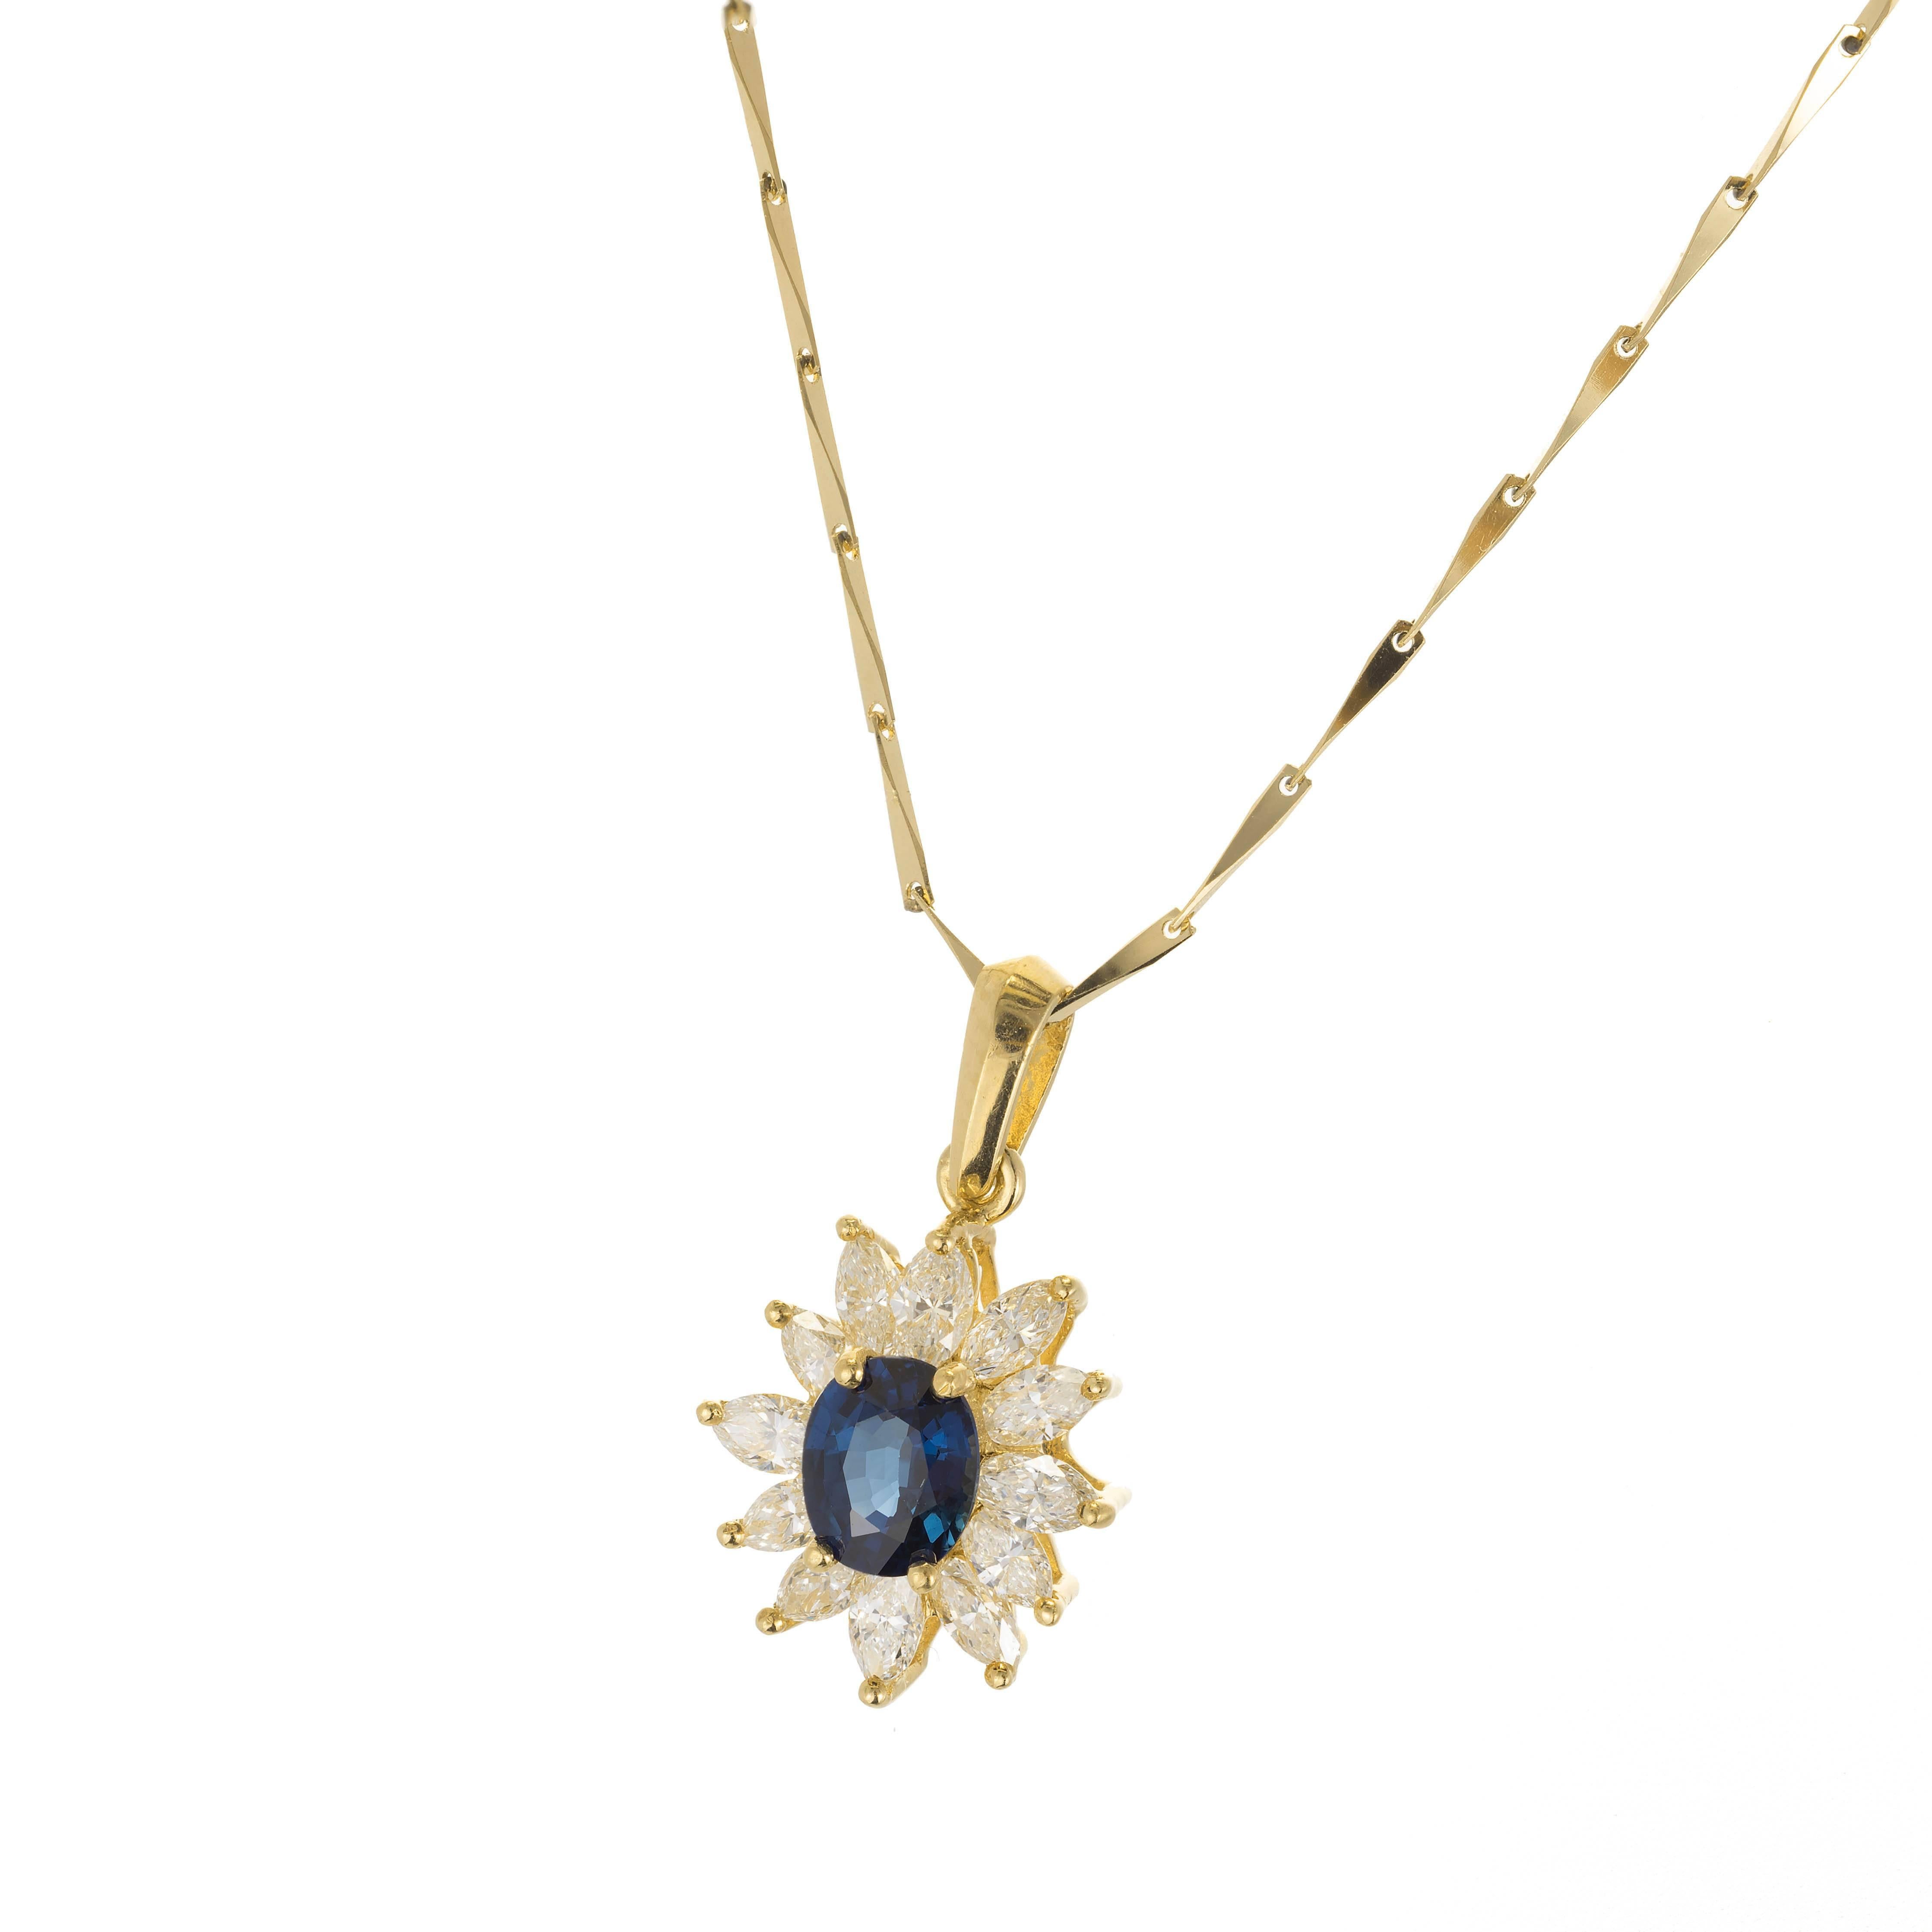 18k yellow gold sapphire and diamond pendant necklace. 18k wedged bar style link chain. An oval faceted blue sapphire is surrounded by a cluster of marquise shaped diamonds.

1 oval blue no heat sapphire 5.78 x 4.83 x 3.01 Approximate .63 carats GIA